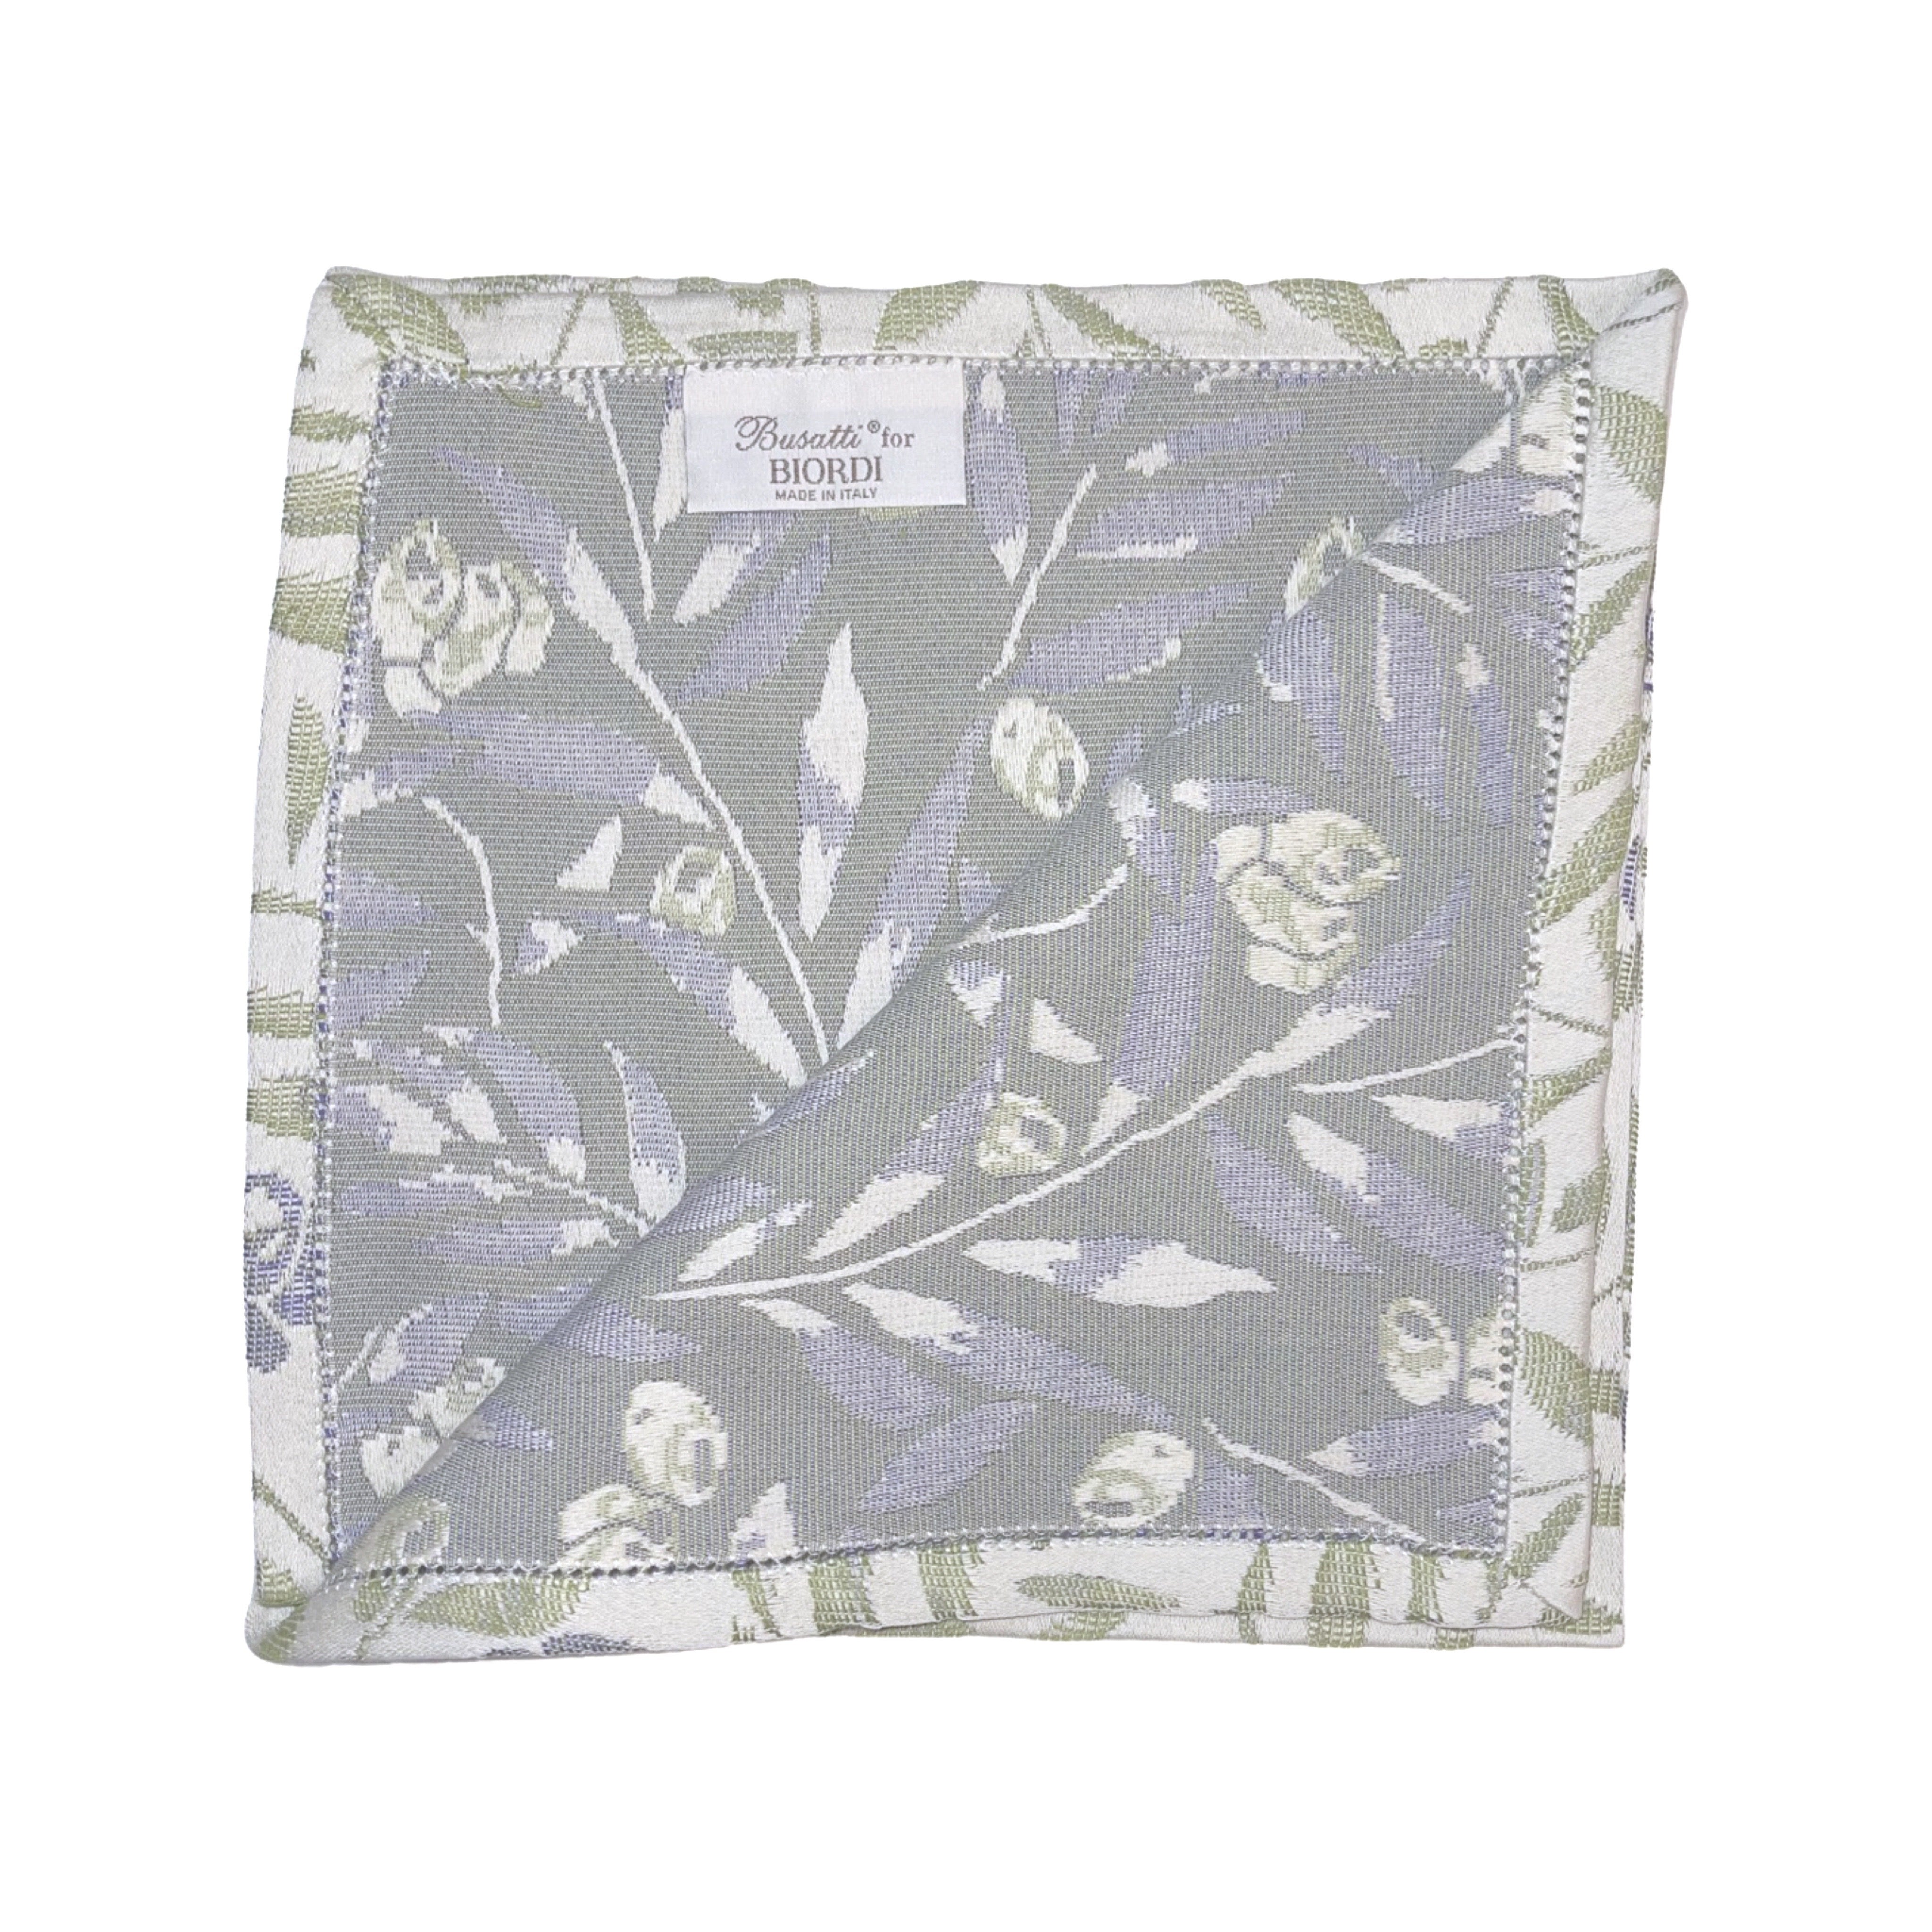 Busatti Napkin Set of 4, Olive on the Vine - Laudemio, ceramics, pottery, italian design, majolica, handmade, handcrafted, handpainted, home decor, kitchen art, home goods, deruta, majolica, Artisan, treasures, traditional art, modern art, gift ideas, style, SF, shop small business, artists, shop online, landmark store, legacy, one of a kind, limited edition, gift guide, gift shop, retail shop, decorations, shopping, italy, home staging, home decorating, home interiors